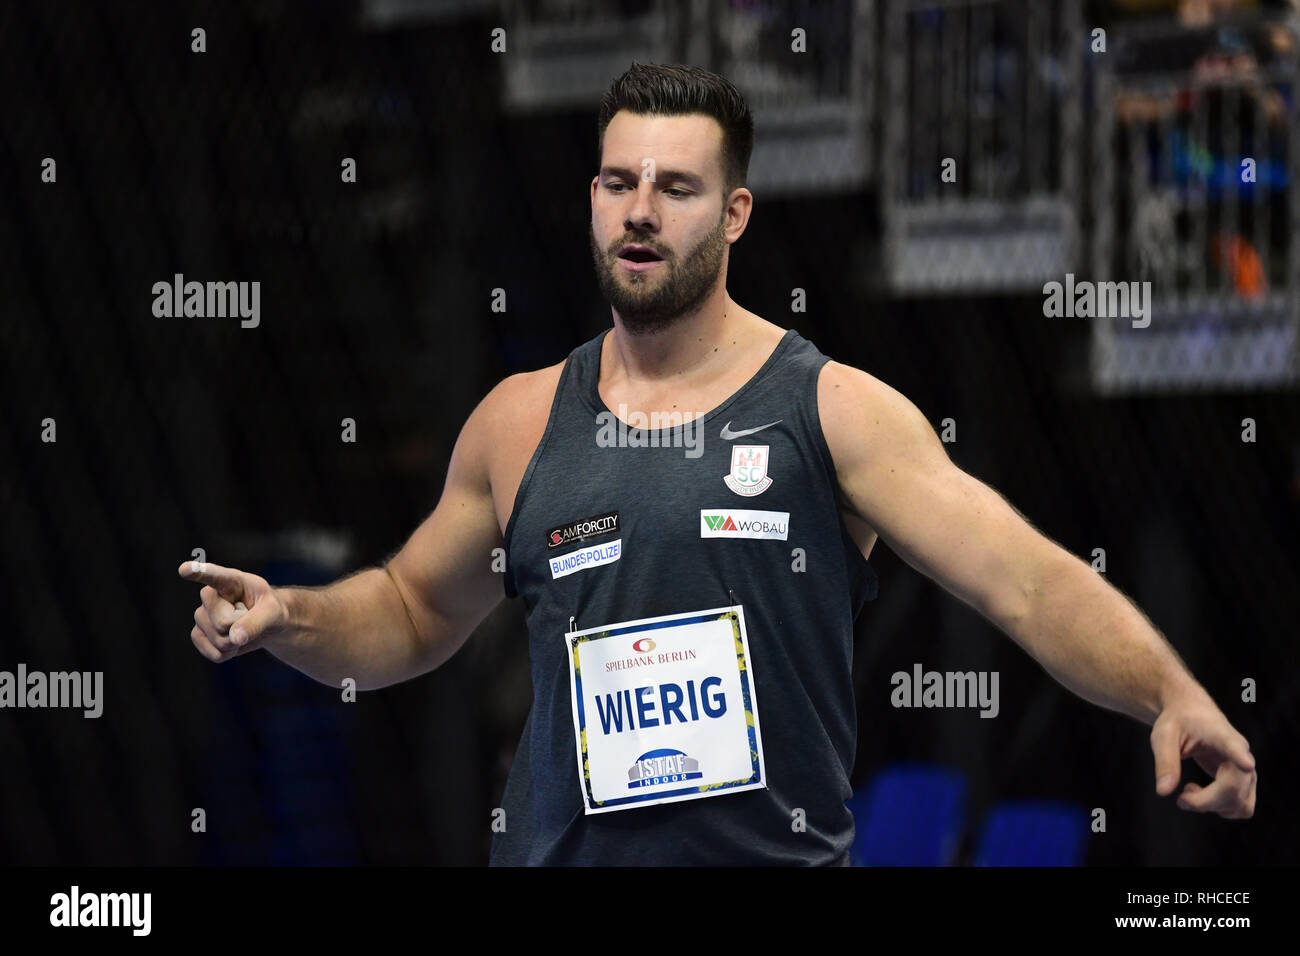 Berlin, Germany. 01st Feb, 2019. ISTAF Indoor, discus throwing, mixed, in the Mercedes-Benz Arena: Martin Wierig (Germany). Credit: Soeren Stache/dpa/Alamy Live News Stock Photo